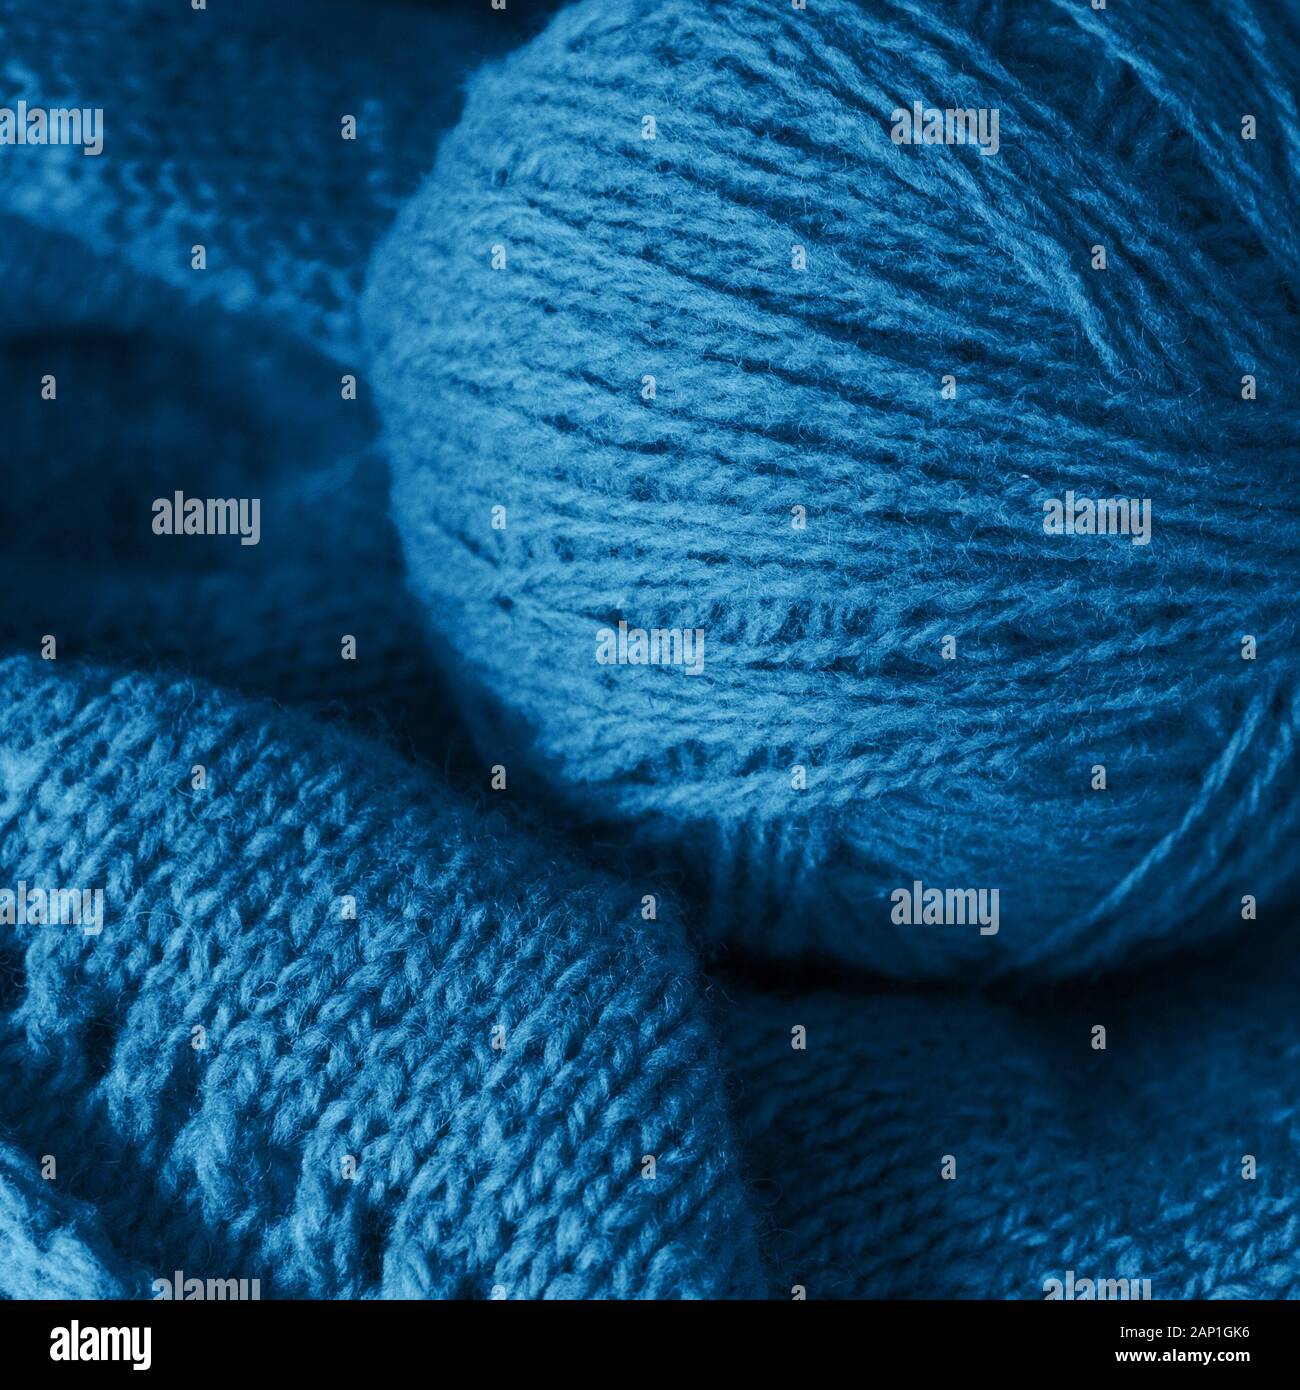 The process of knitting, woolen yarn of classic blue color on blue table. Stock Photo